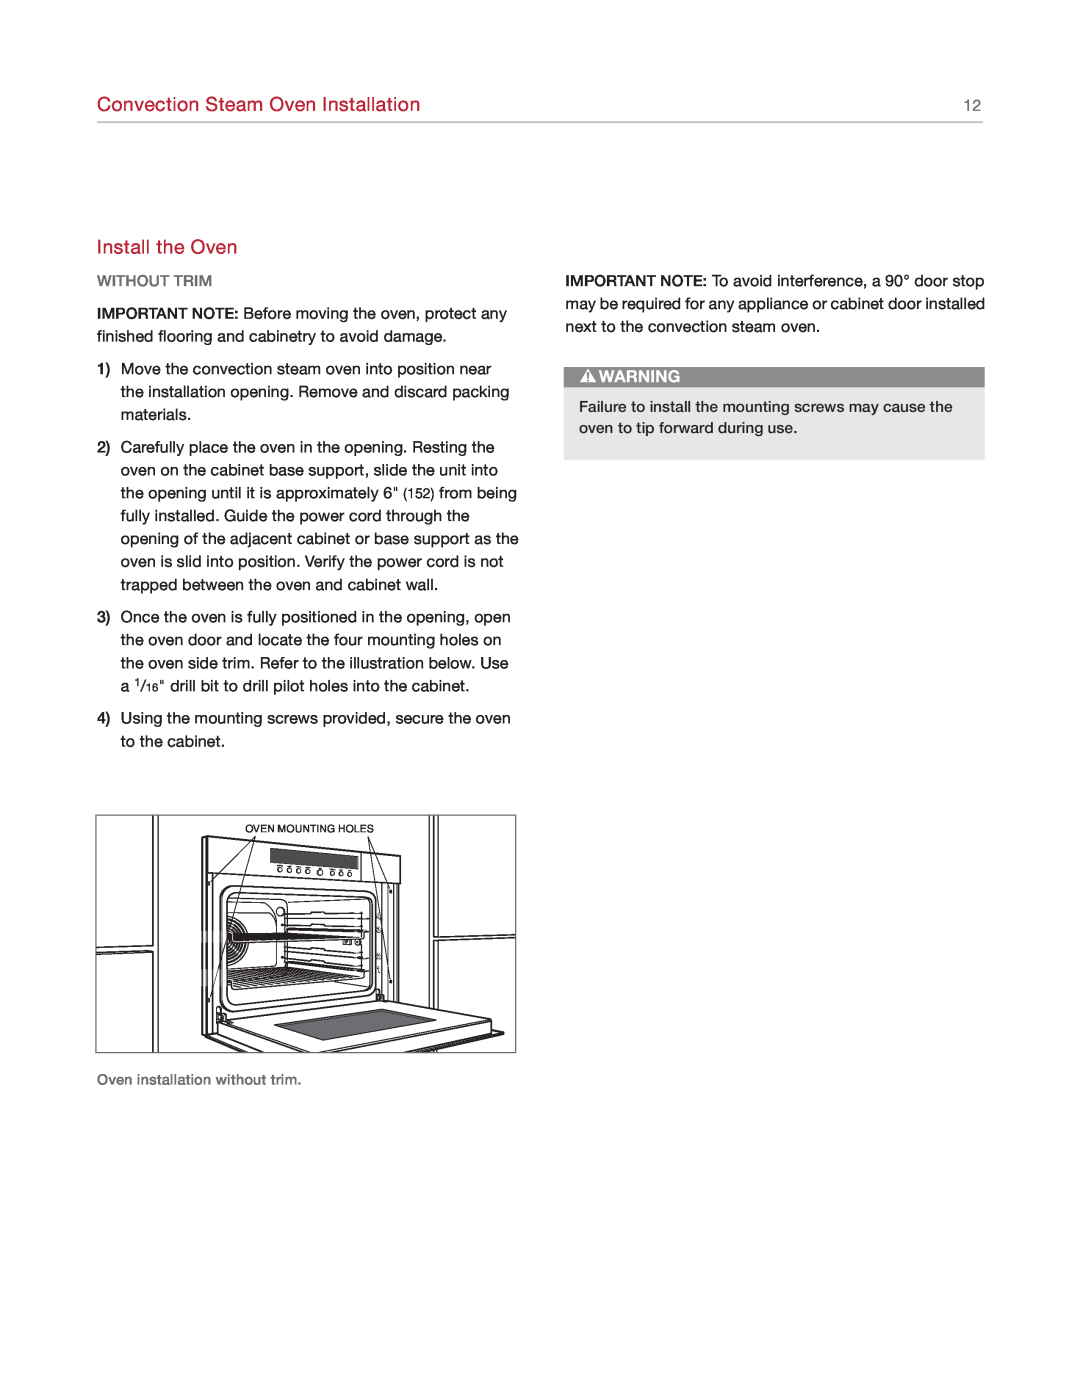 Sub-Zero CSO24 manual Install the Oven, Without Trim, Convection Steam Oven Installation 